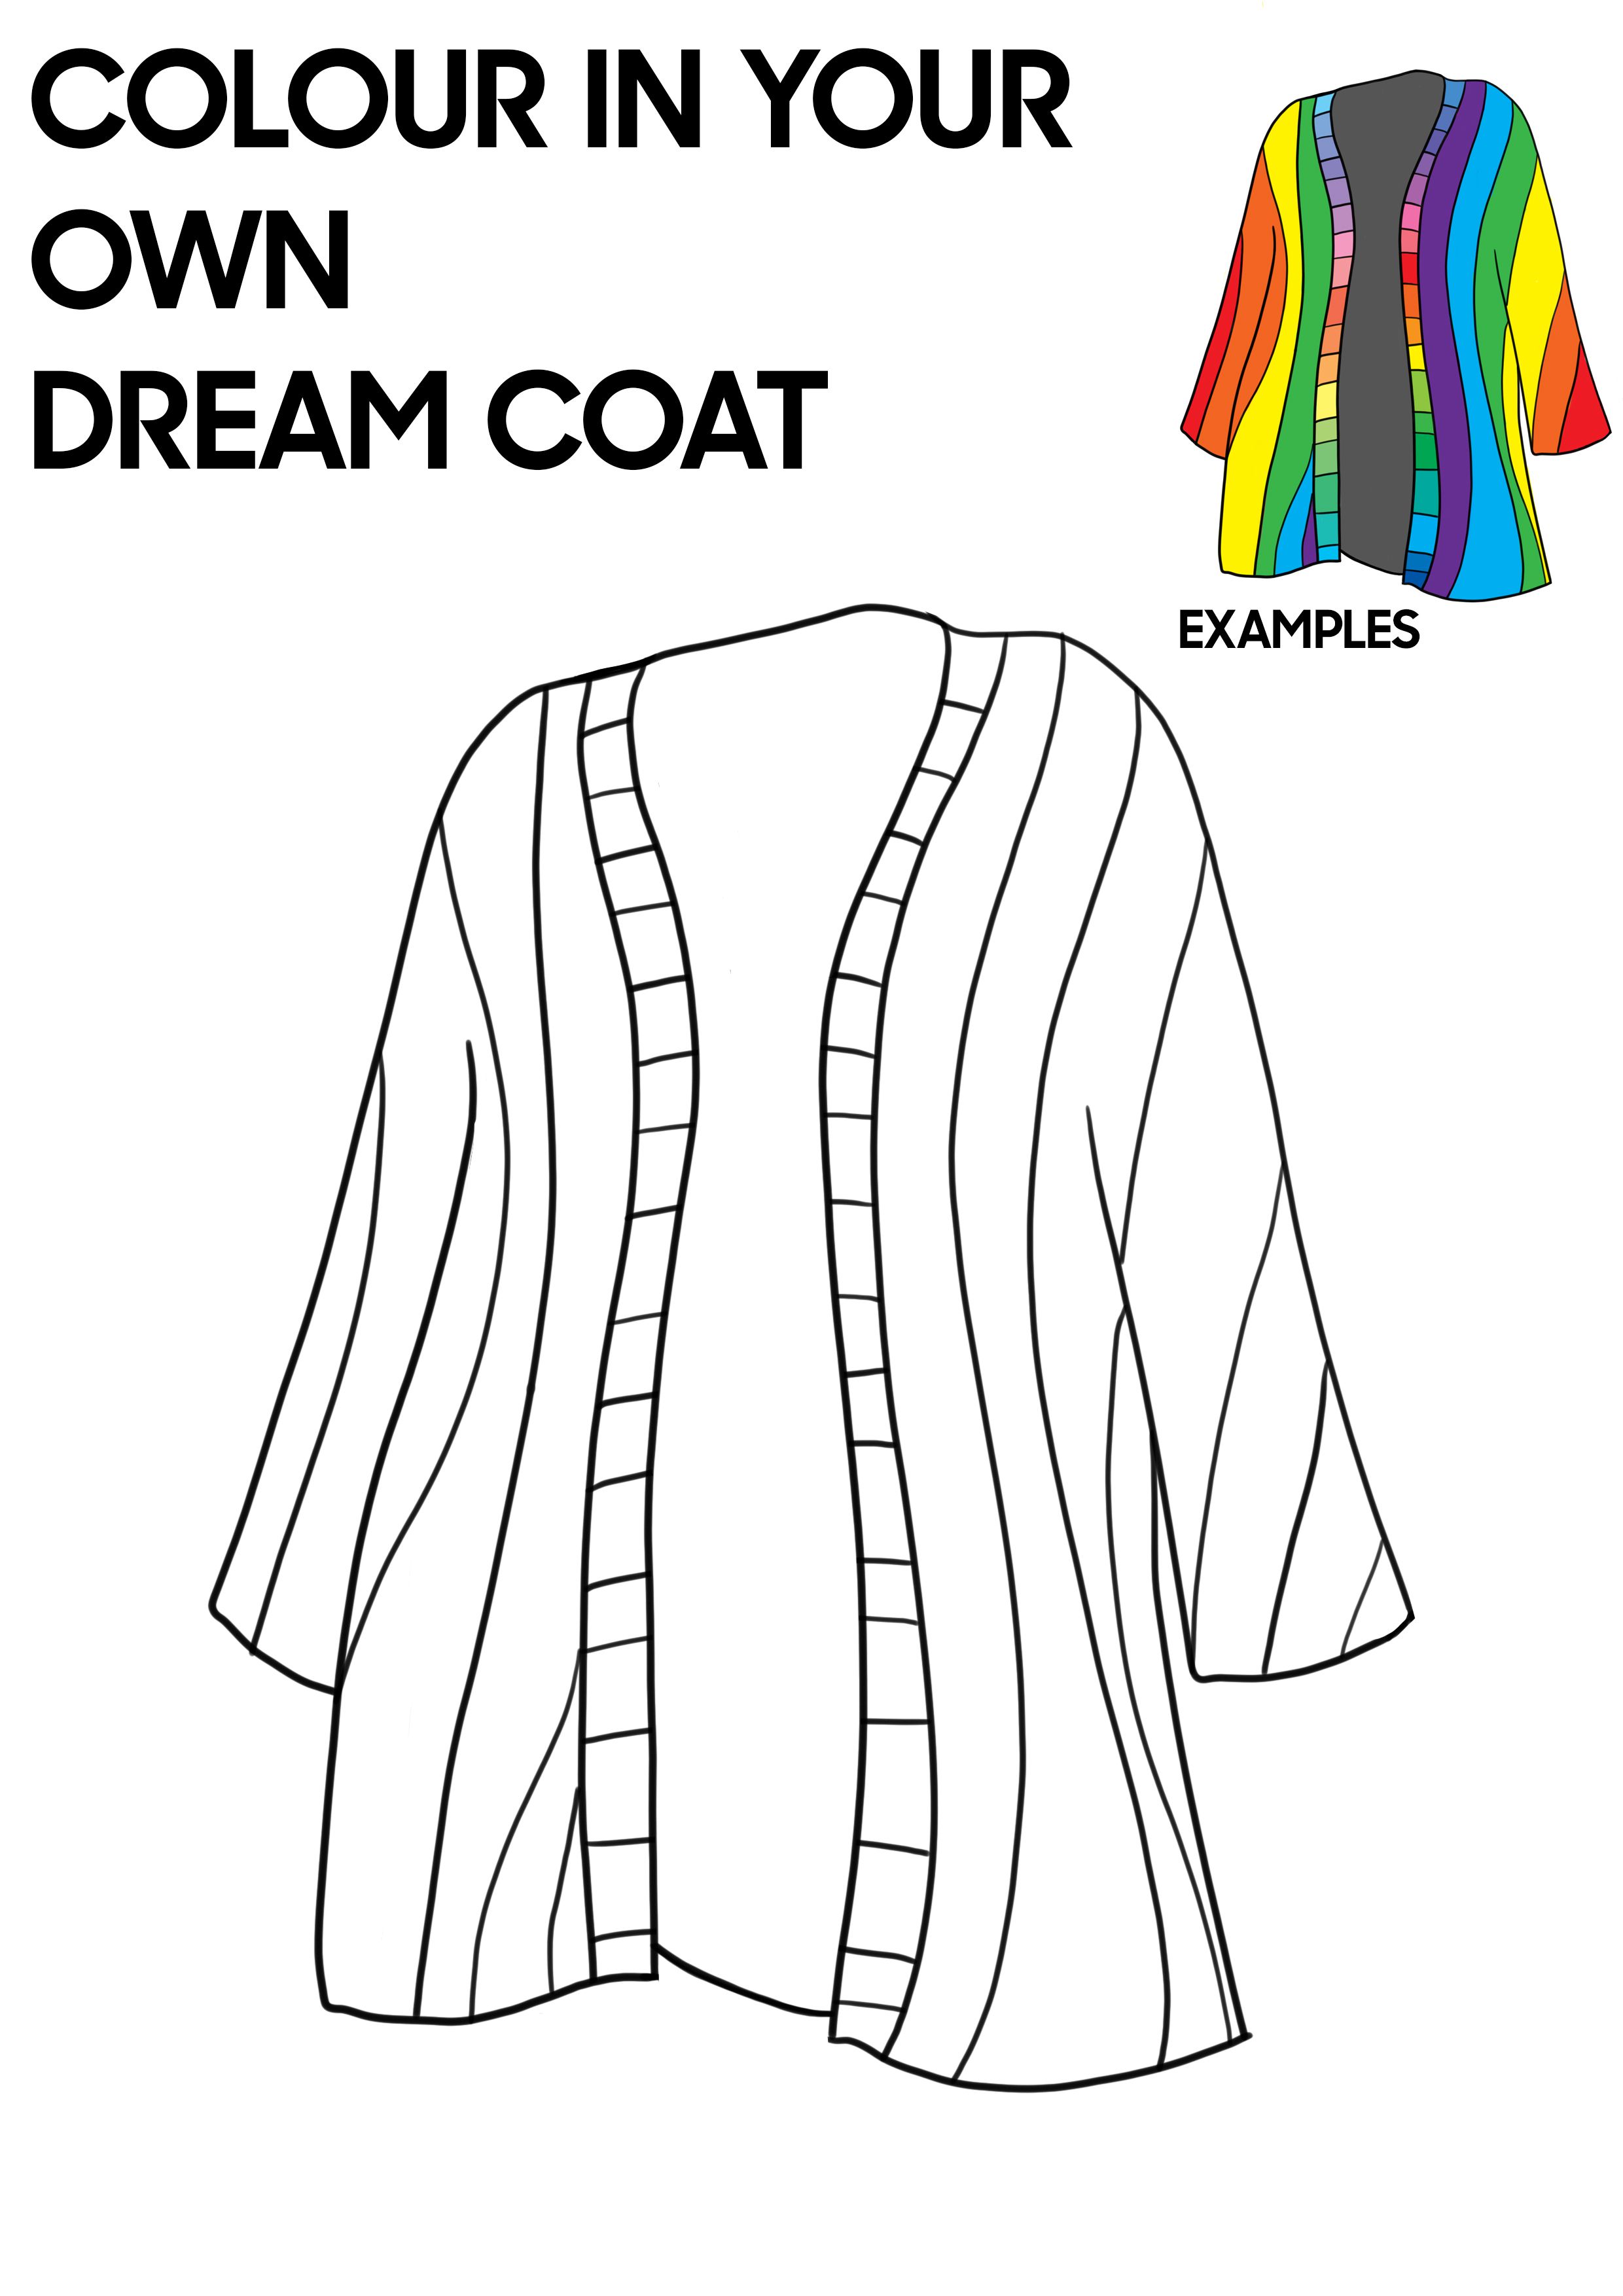 dream coat inspired colouring image